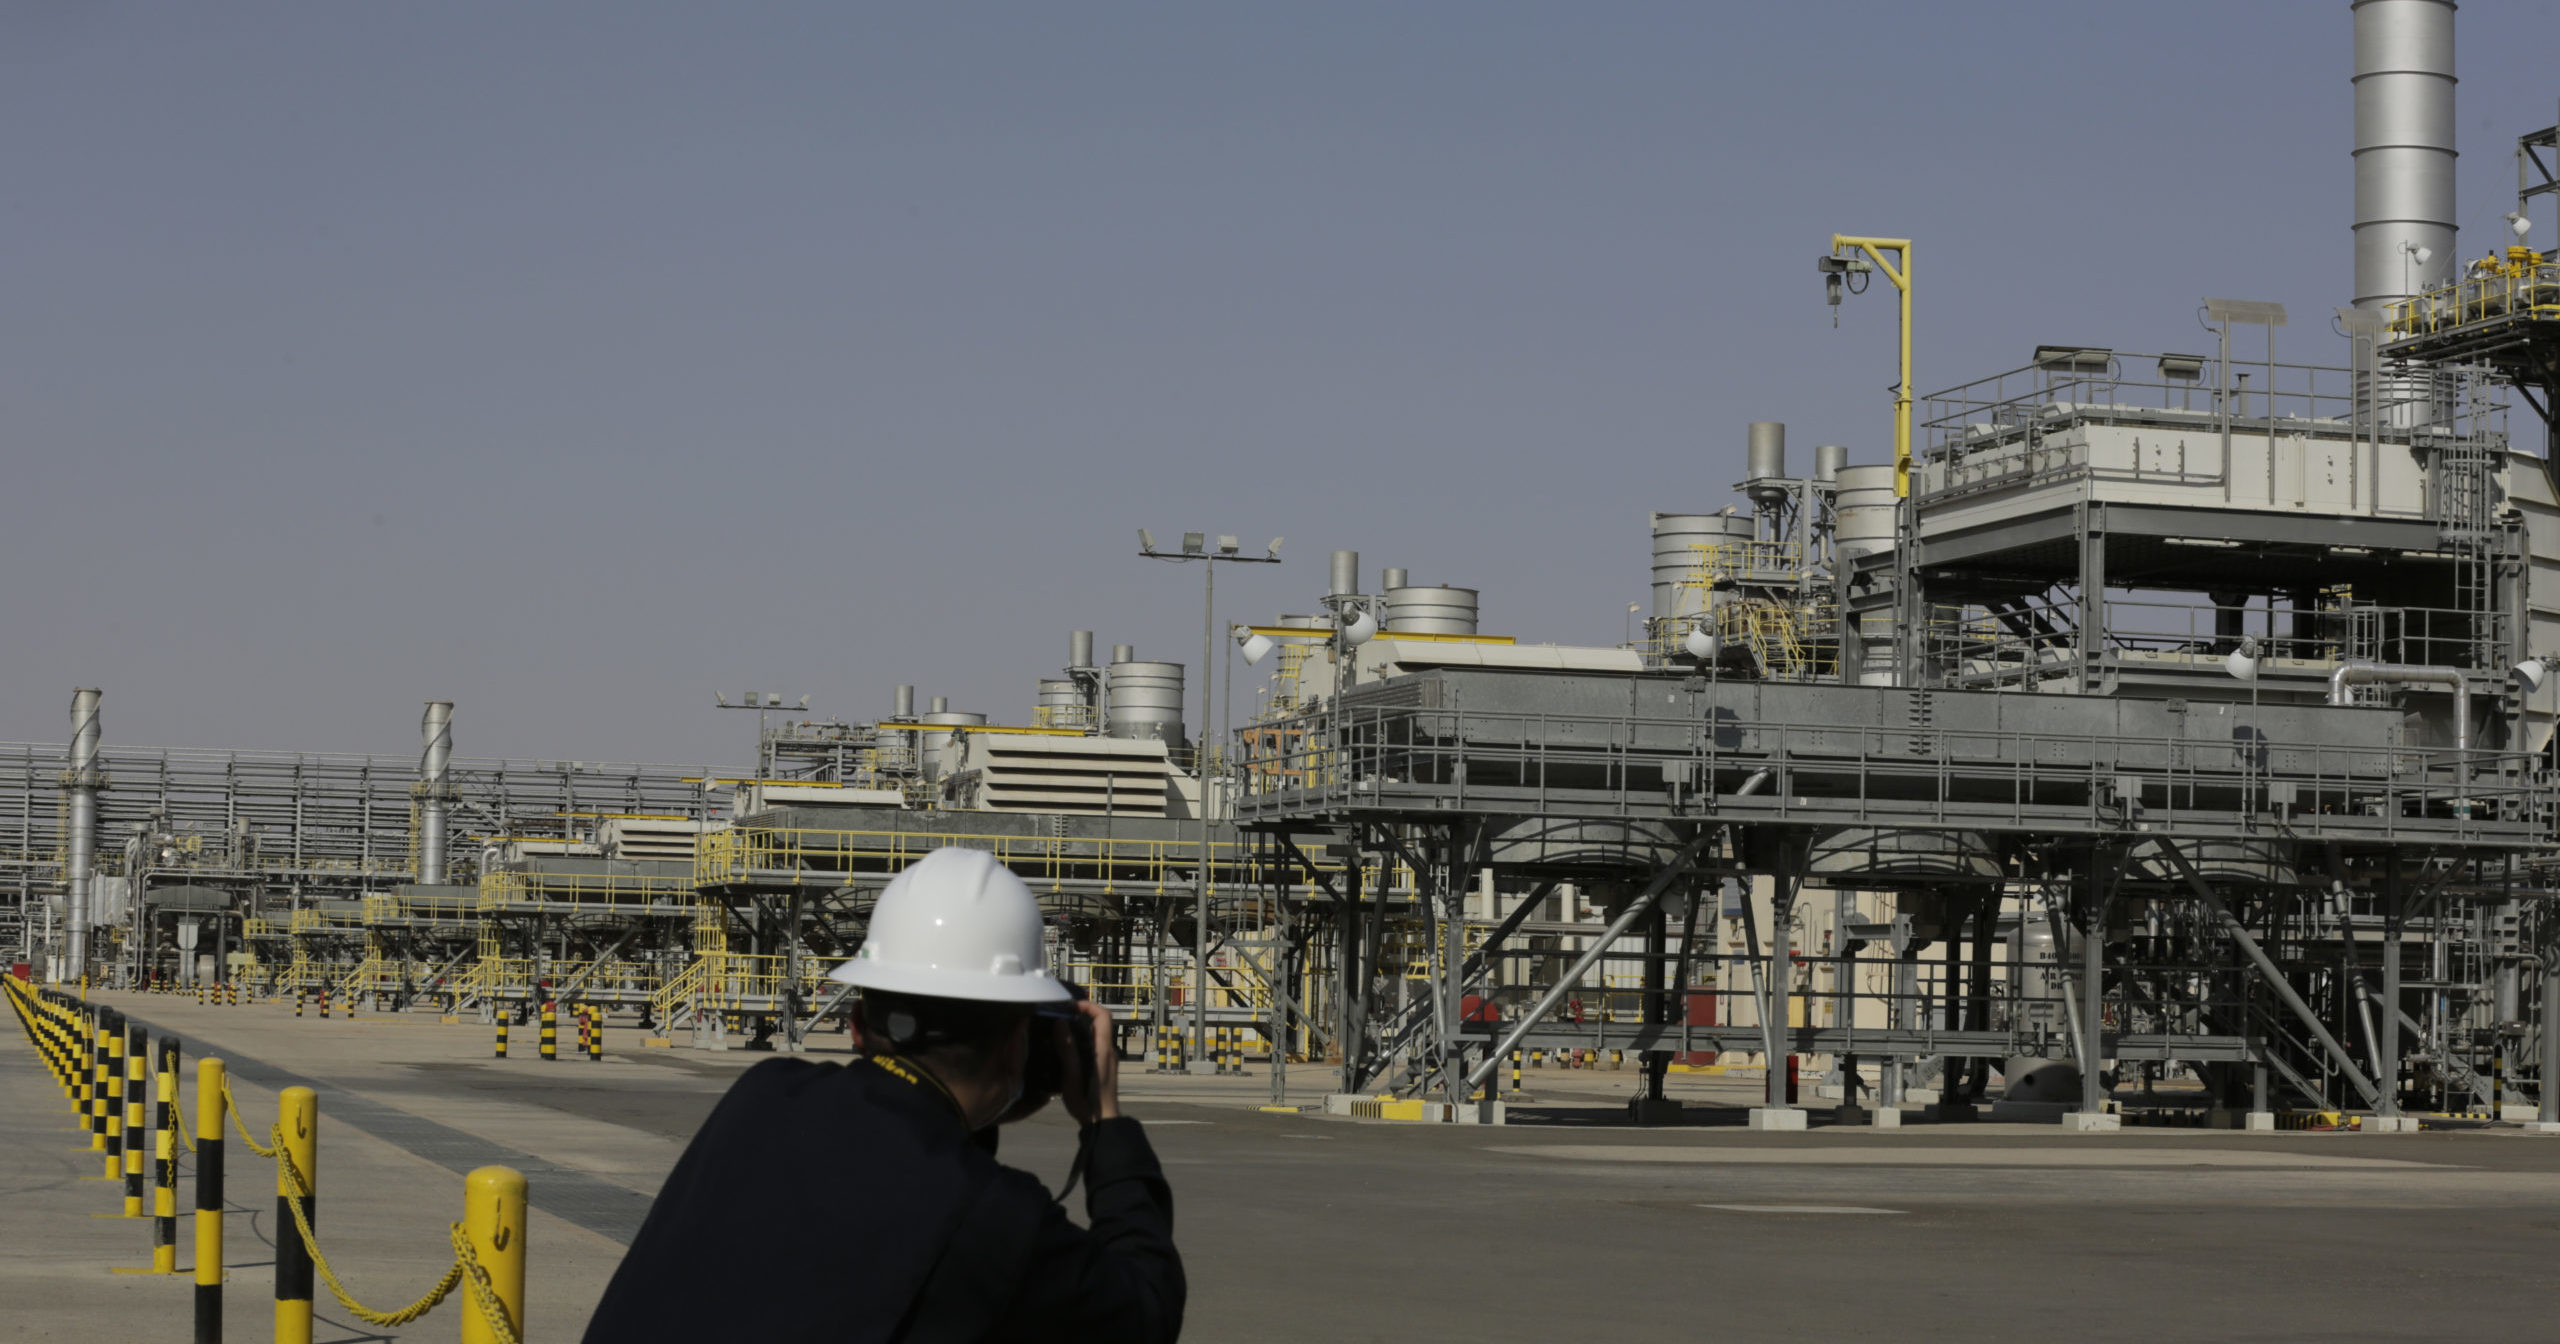 A photographer takes pictures of the Khurais oil field in Saudi Arabia during a tour for journalists on June 28, 2021.